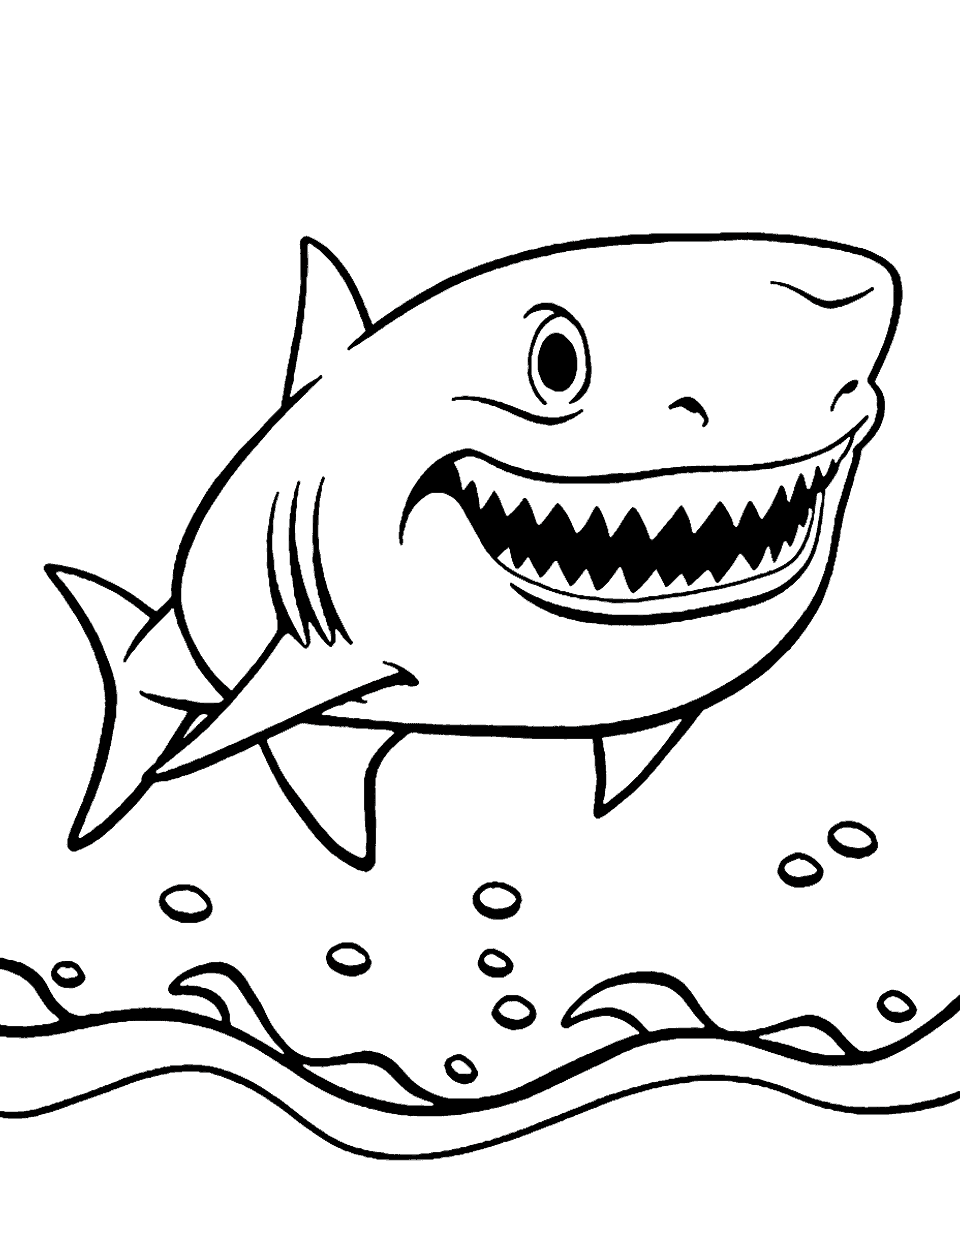 Smiling Shark Animal Coloring Page - A friendly shark swimming in the ocean with a grin on its face.